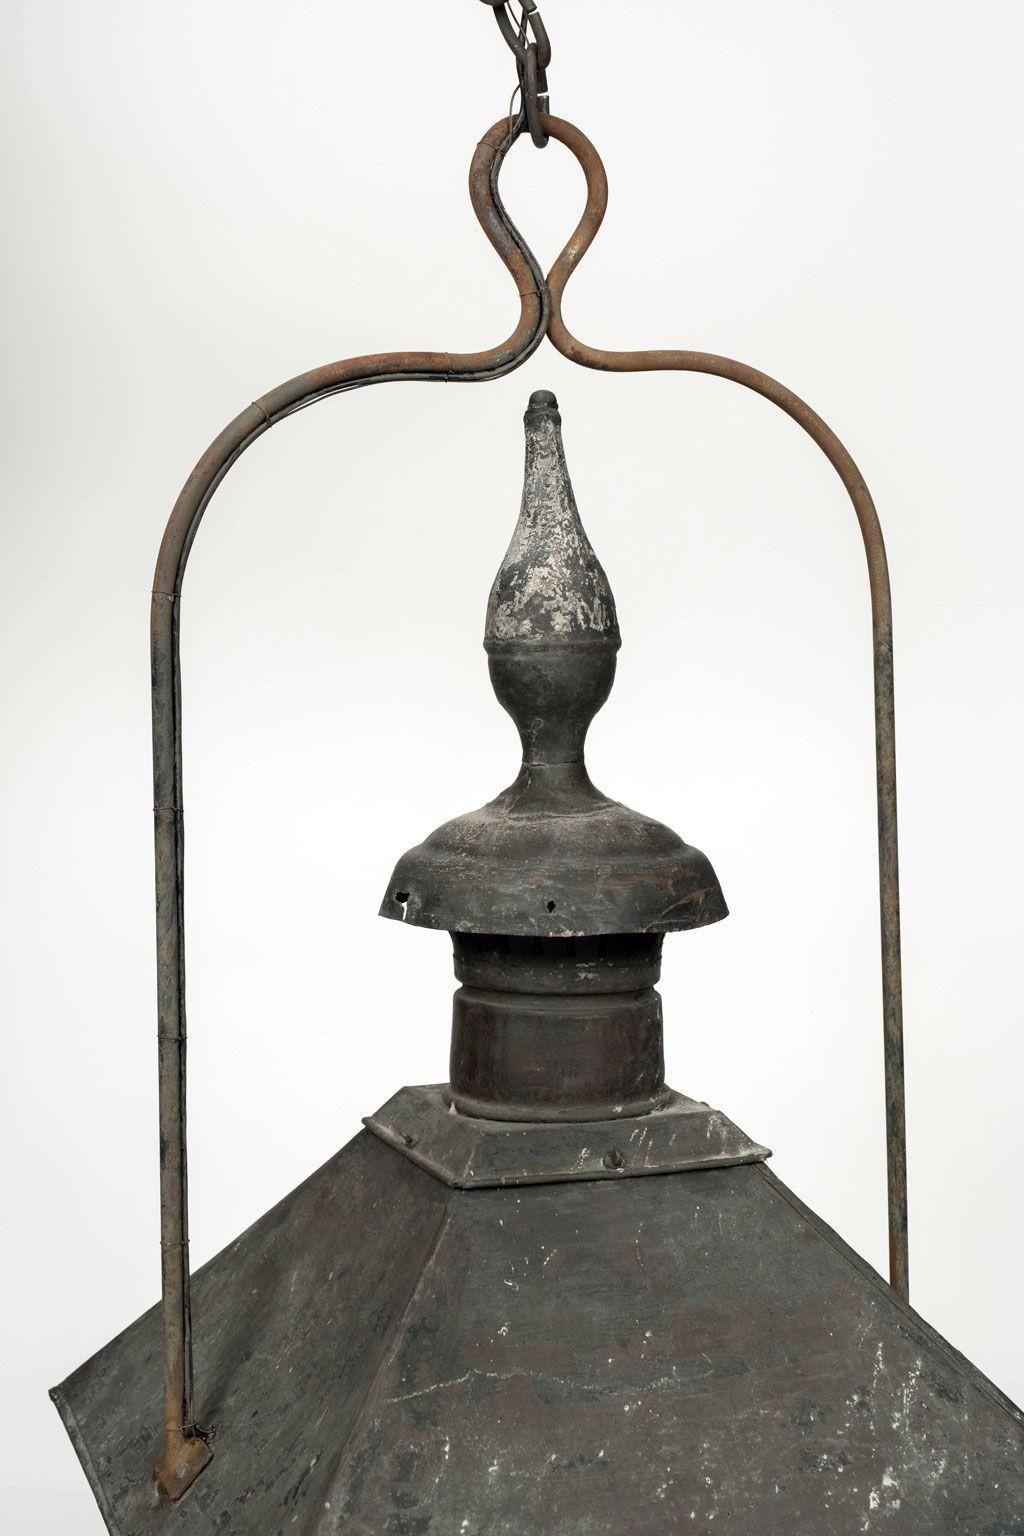 French Provincial 19th Century French Copper and Glass Paneled Lantern